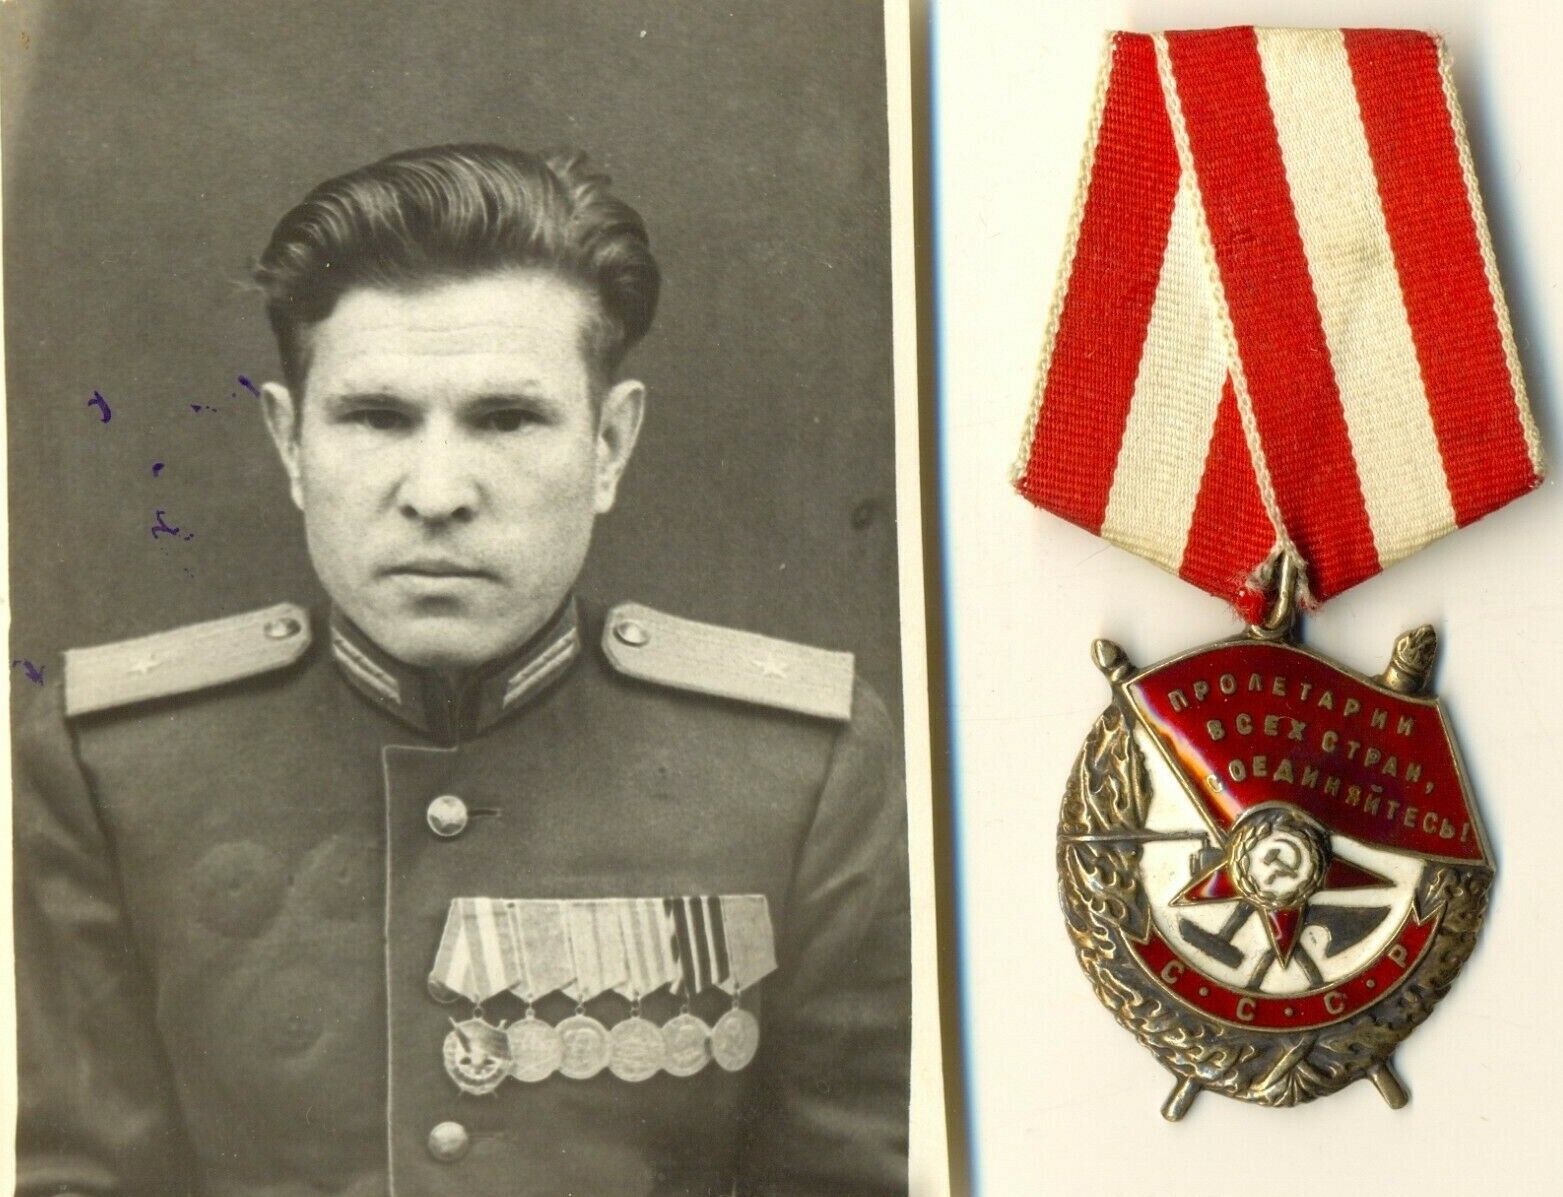 Russian Soviet Medal Order Badge  Red Banner  Very low Number 231142   (#2335b)